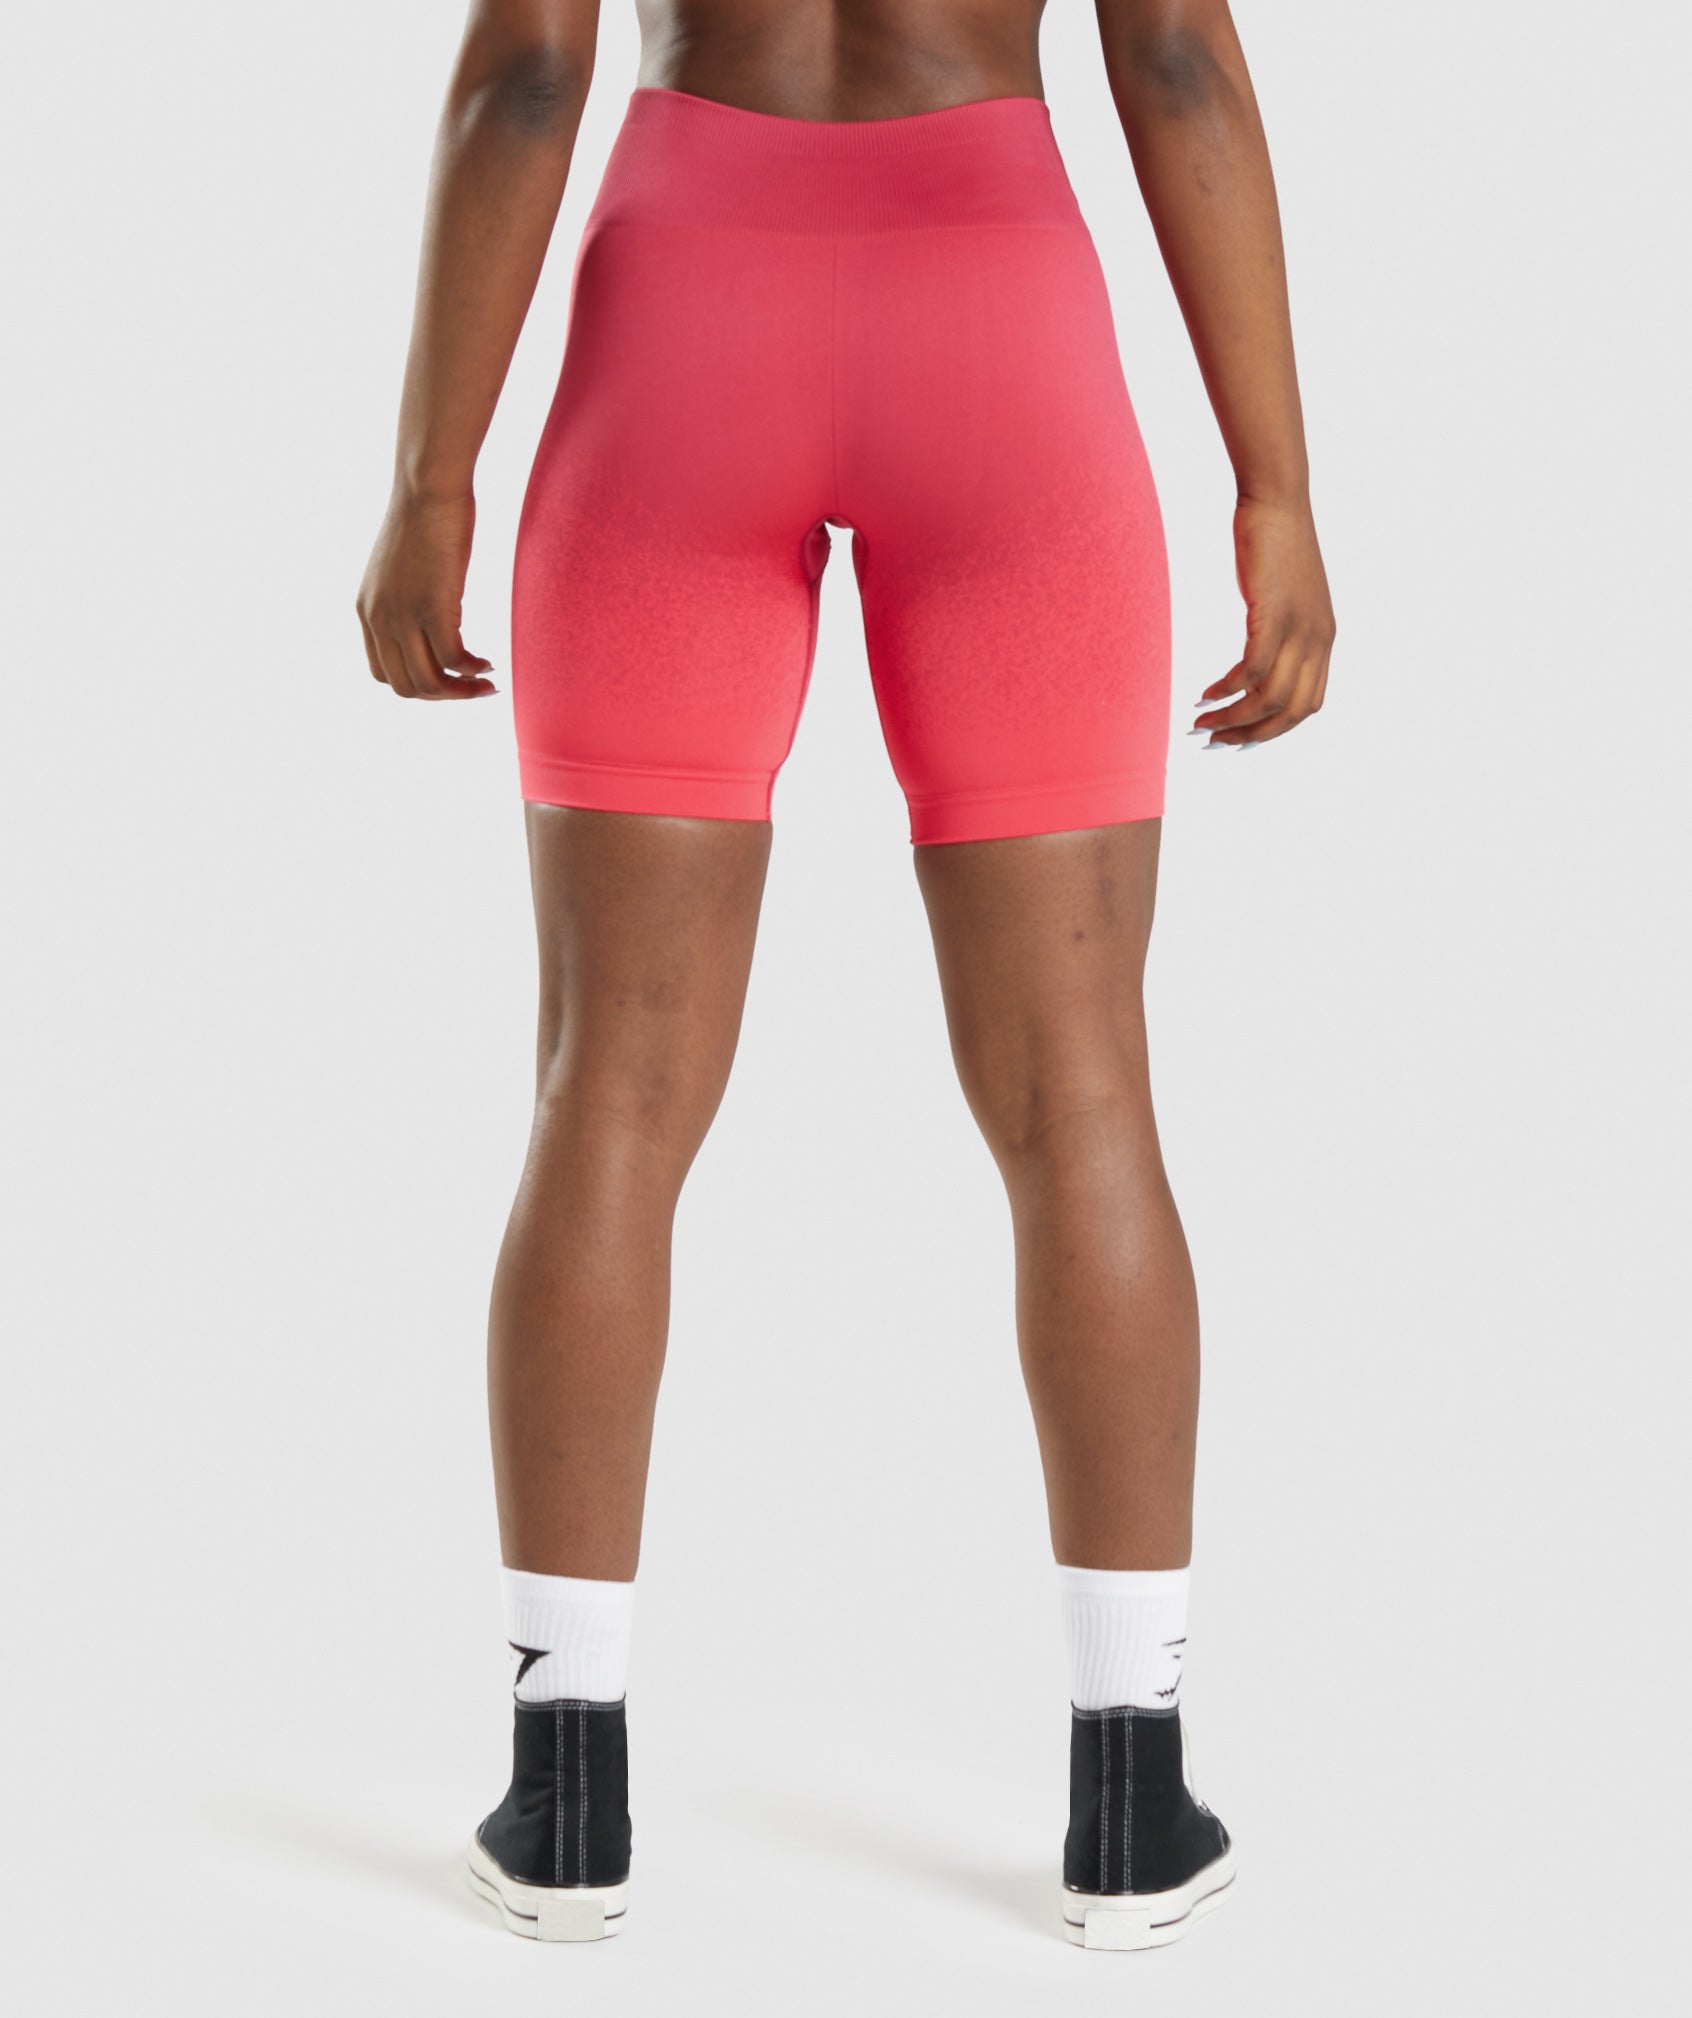 Adapt Ombre Seamless Cycling Shorts in Pink/Red - view 2